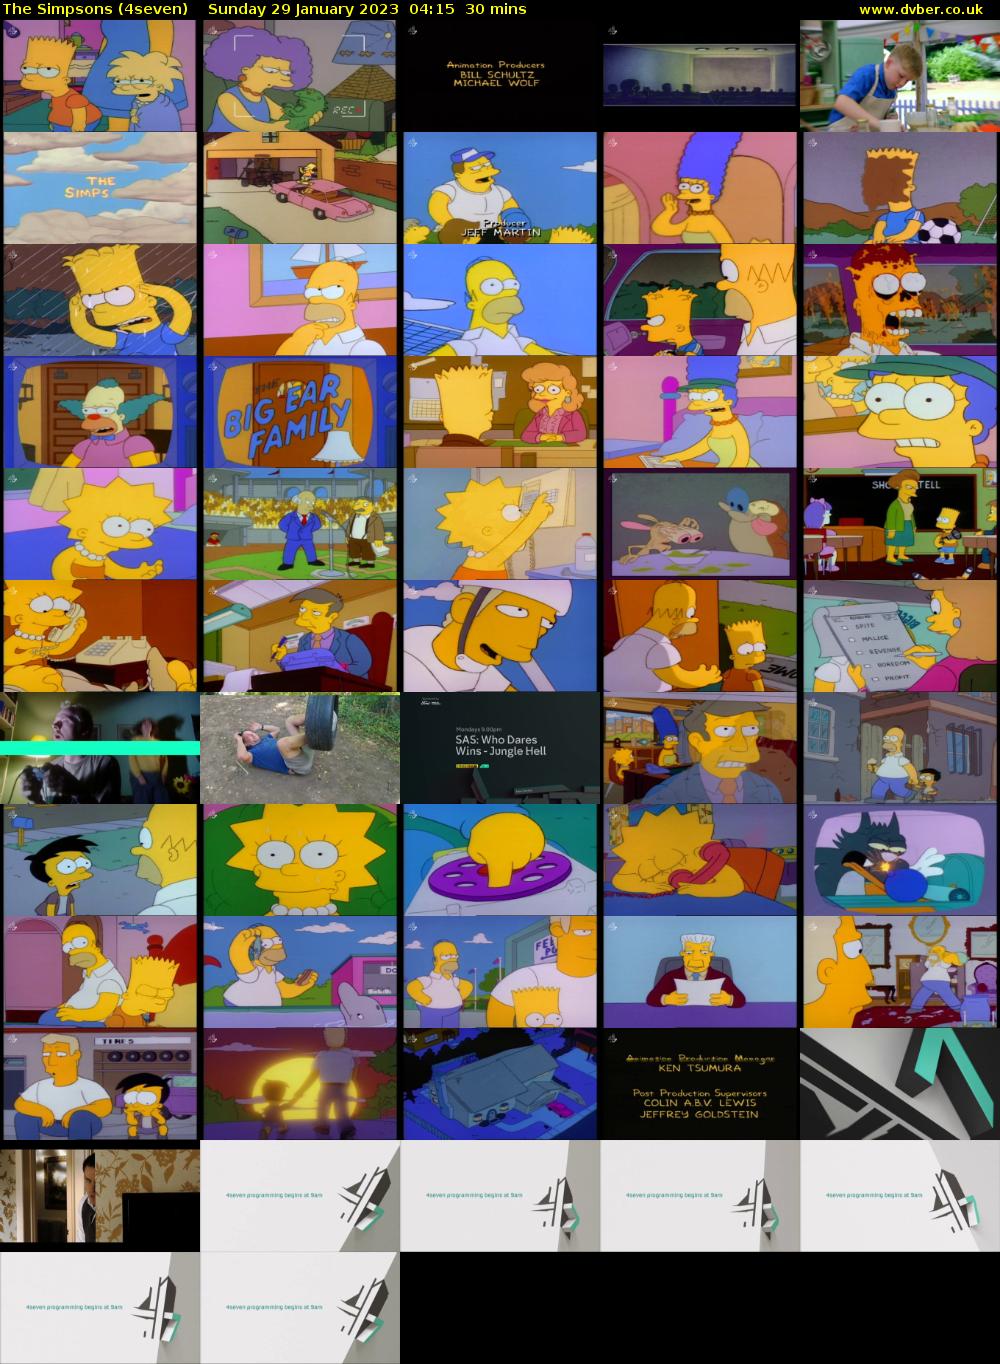 The Simpsons (4seven) Sunday 29 January 2023 04:15 - 04:45